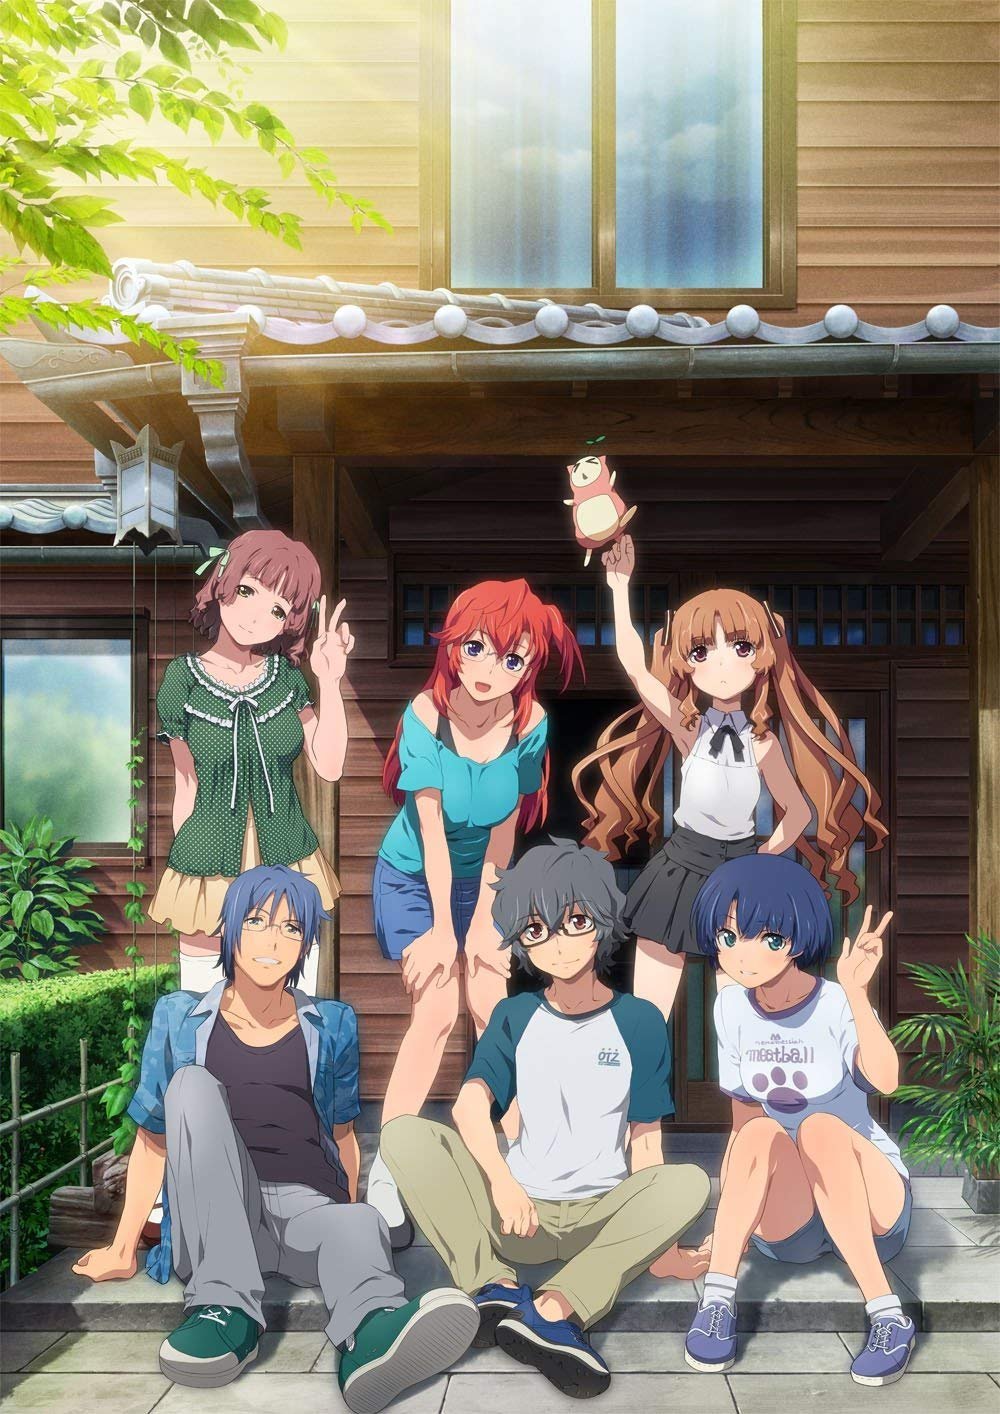 Stream Waiting in the Summer on HIDIVE